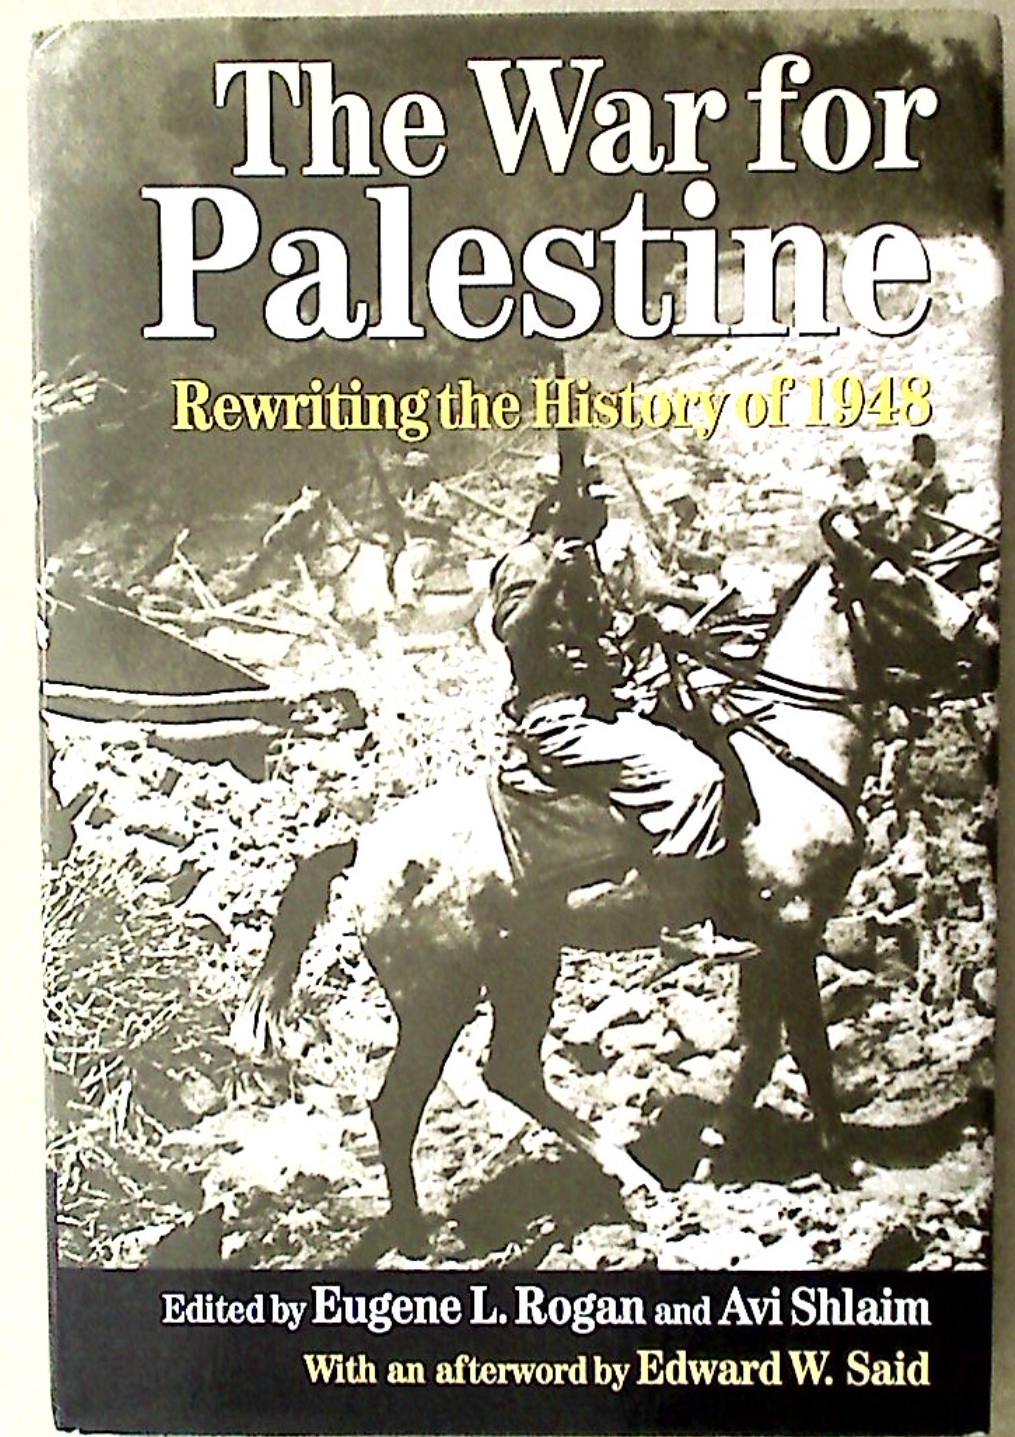 The War for Palestine: Rewriting the History of 1948. - Rogan, Eugene and Avi Shlaim